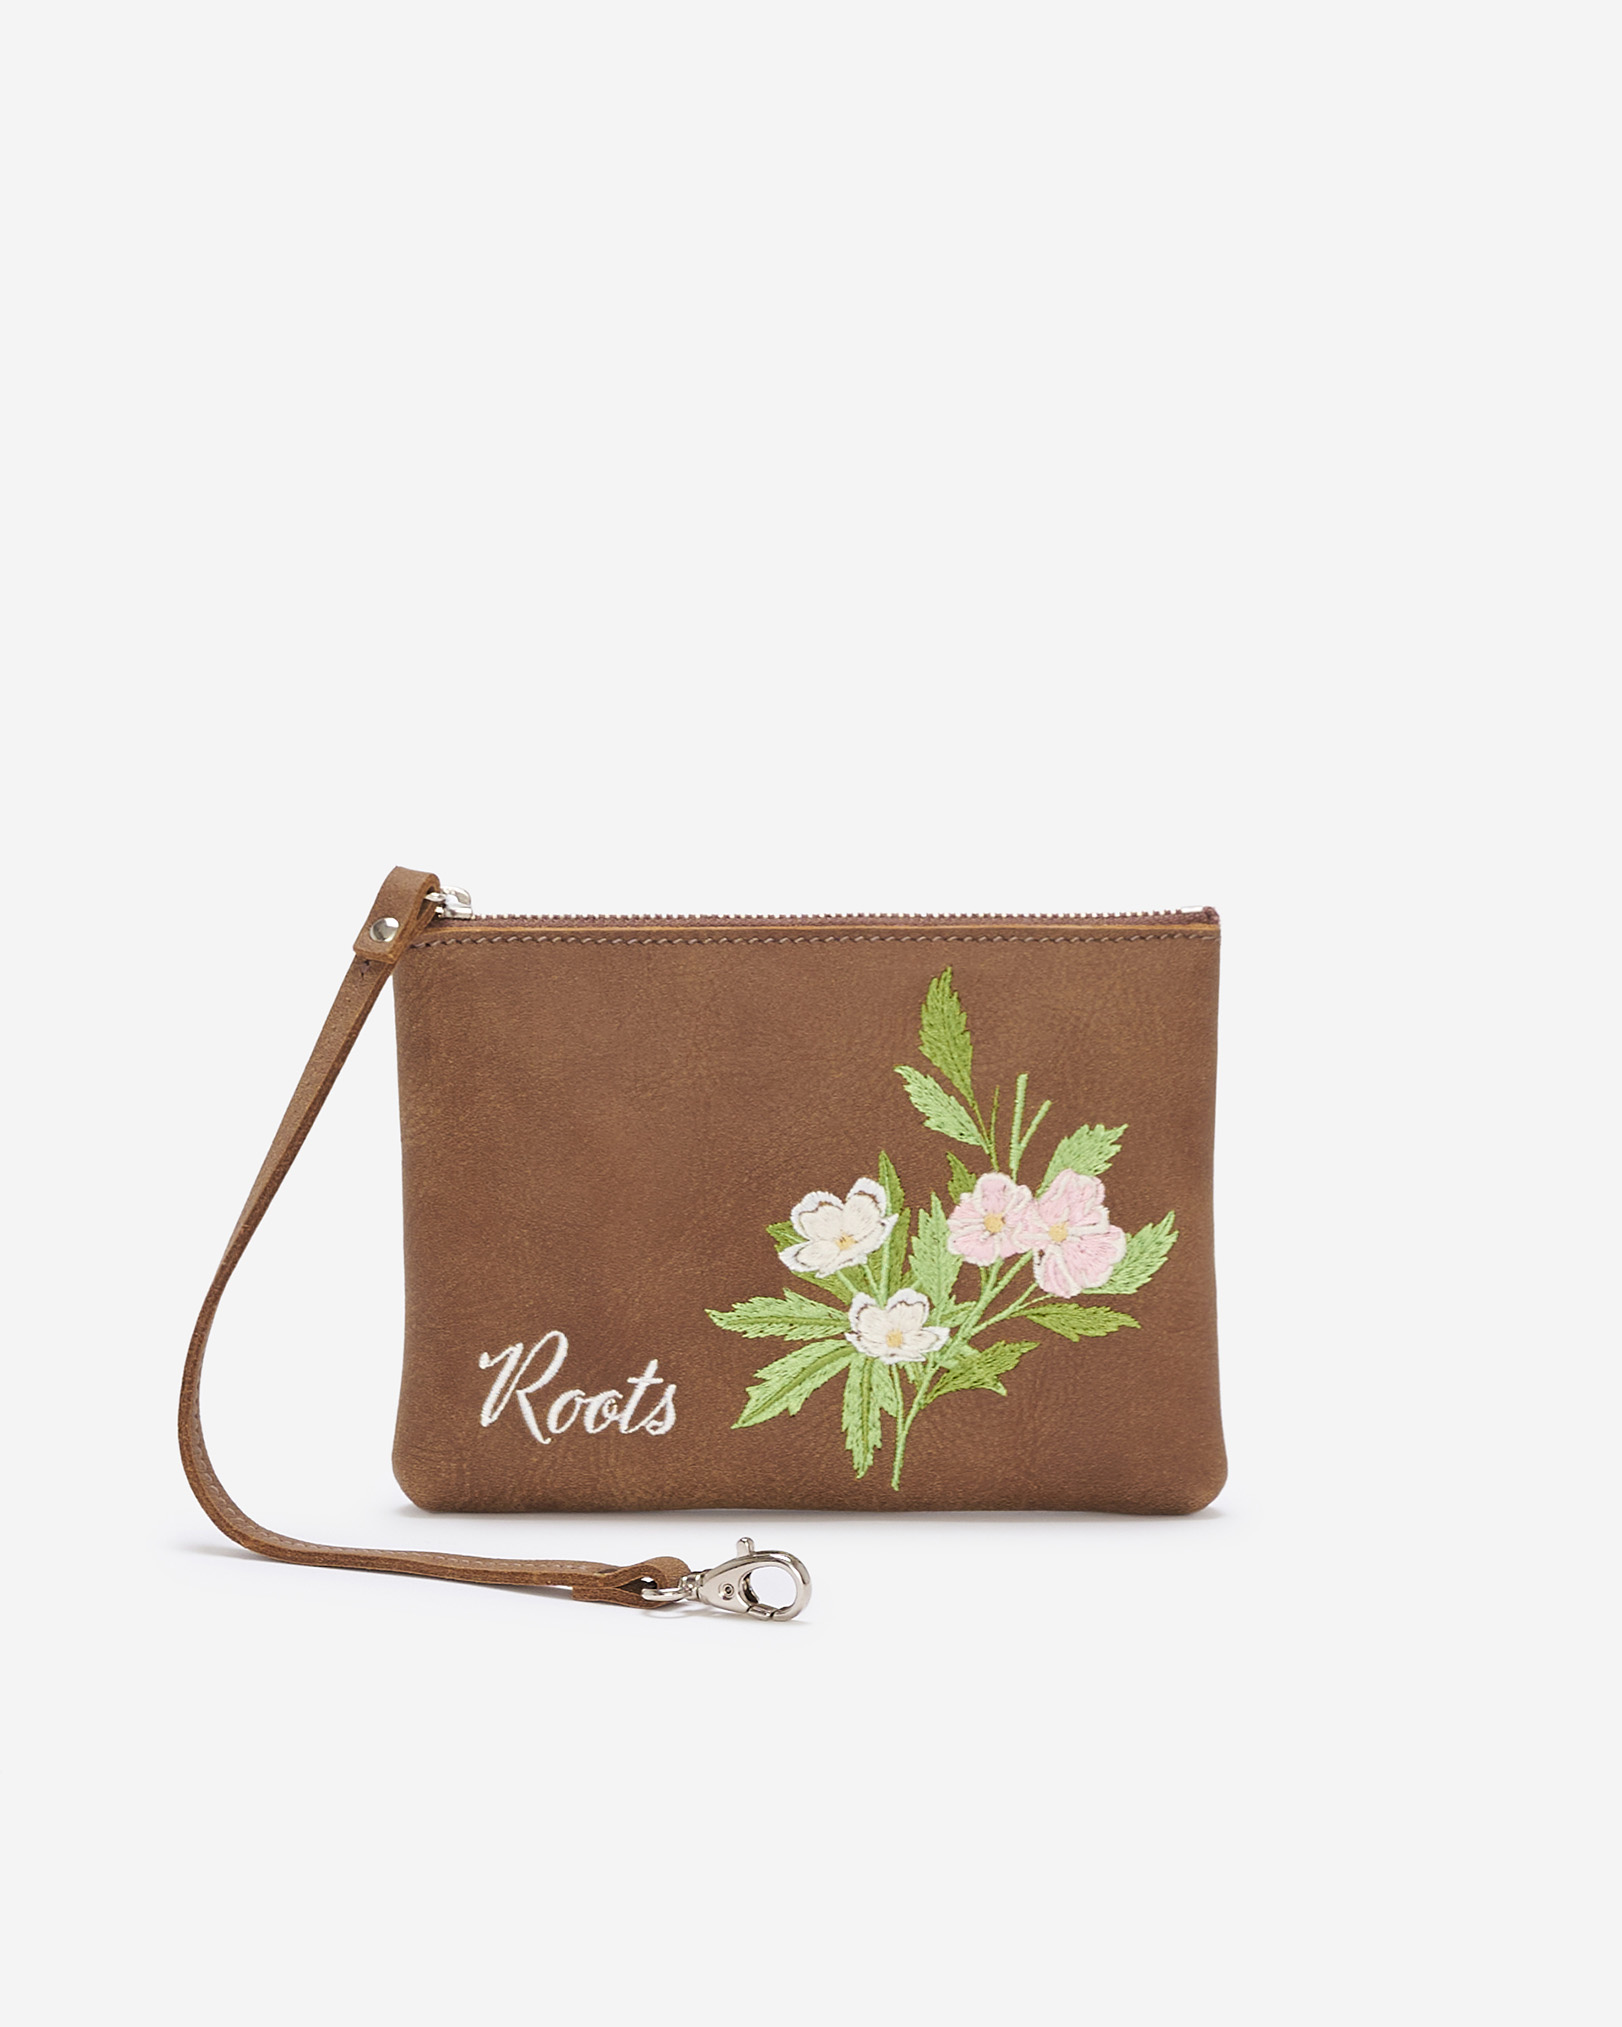 Roots Floral Wristlet Tribe in Natural